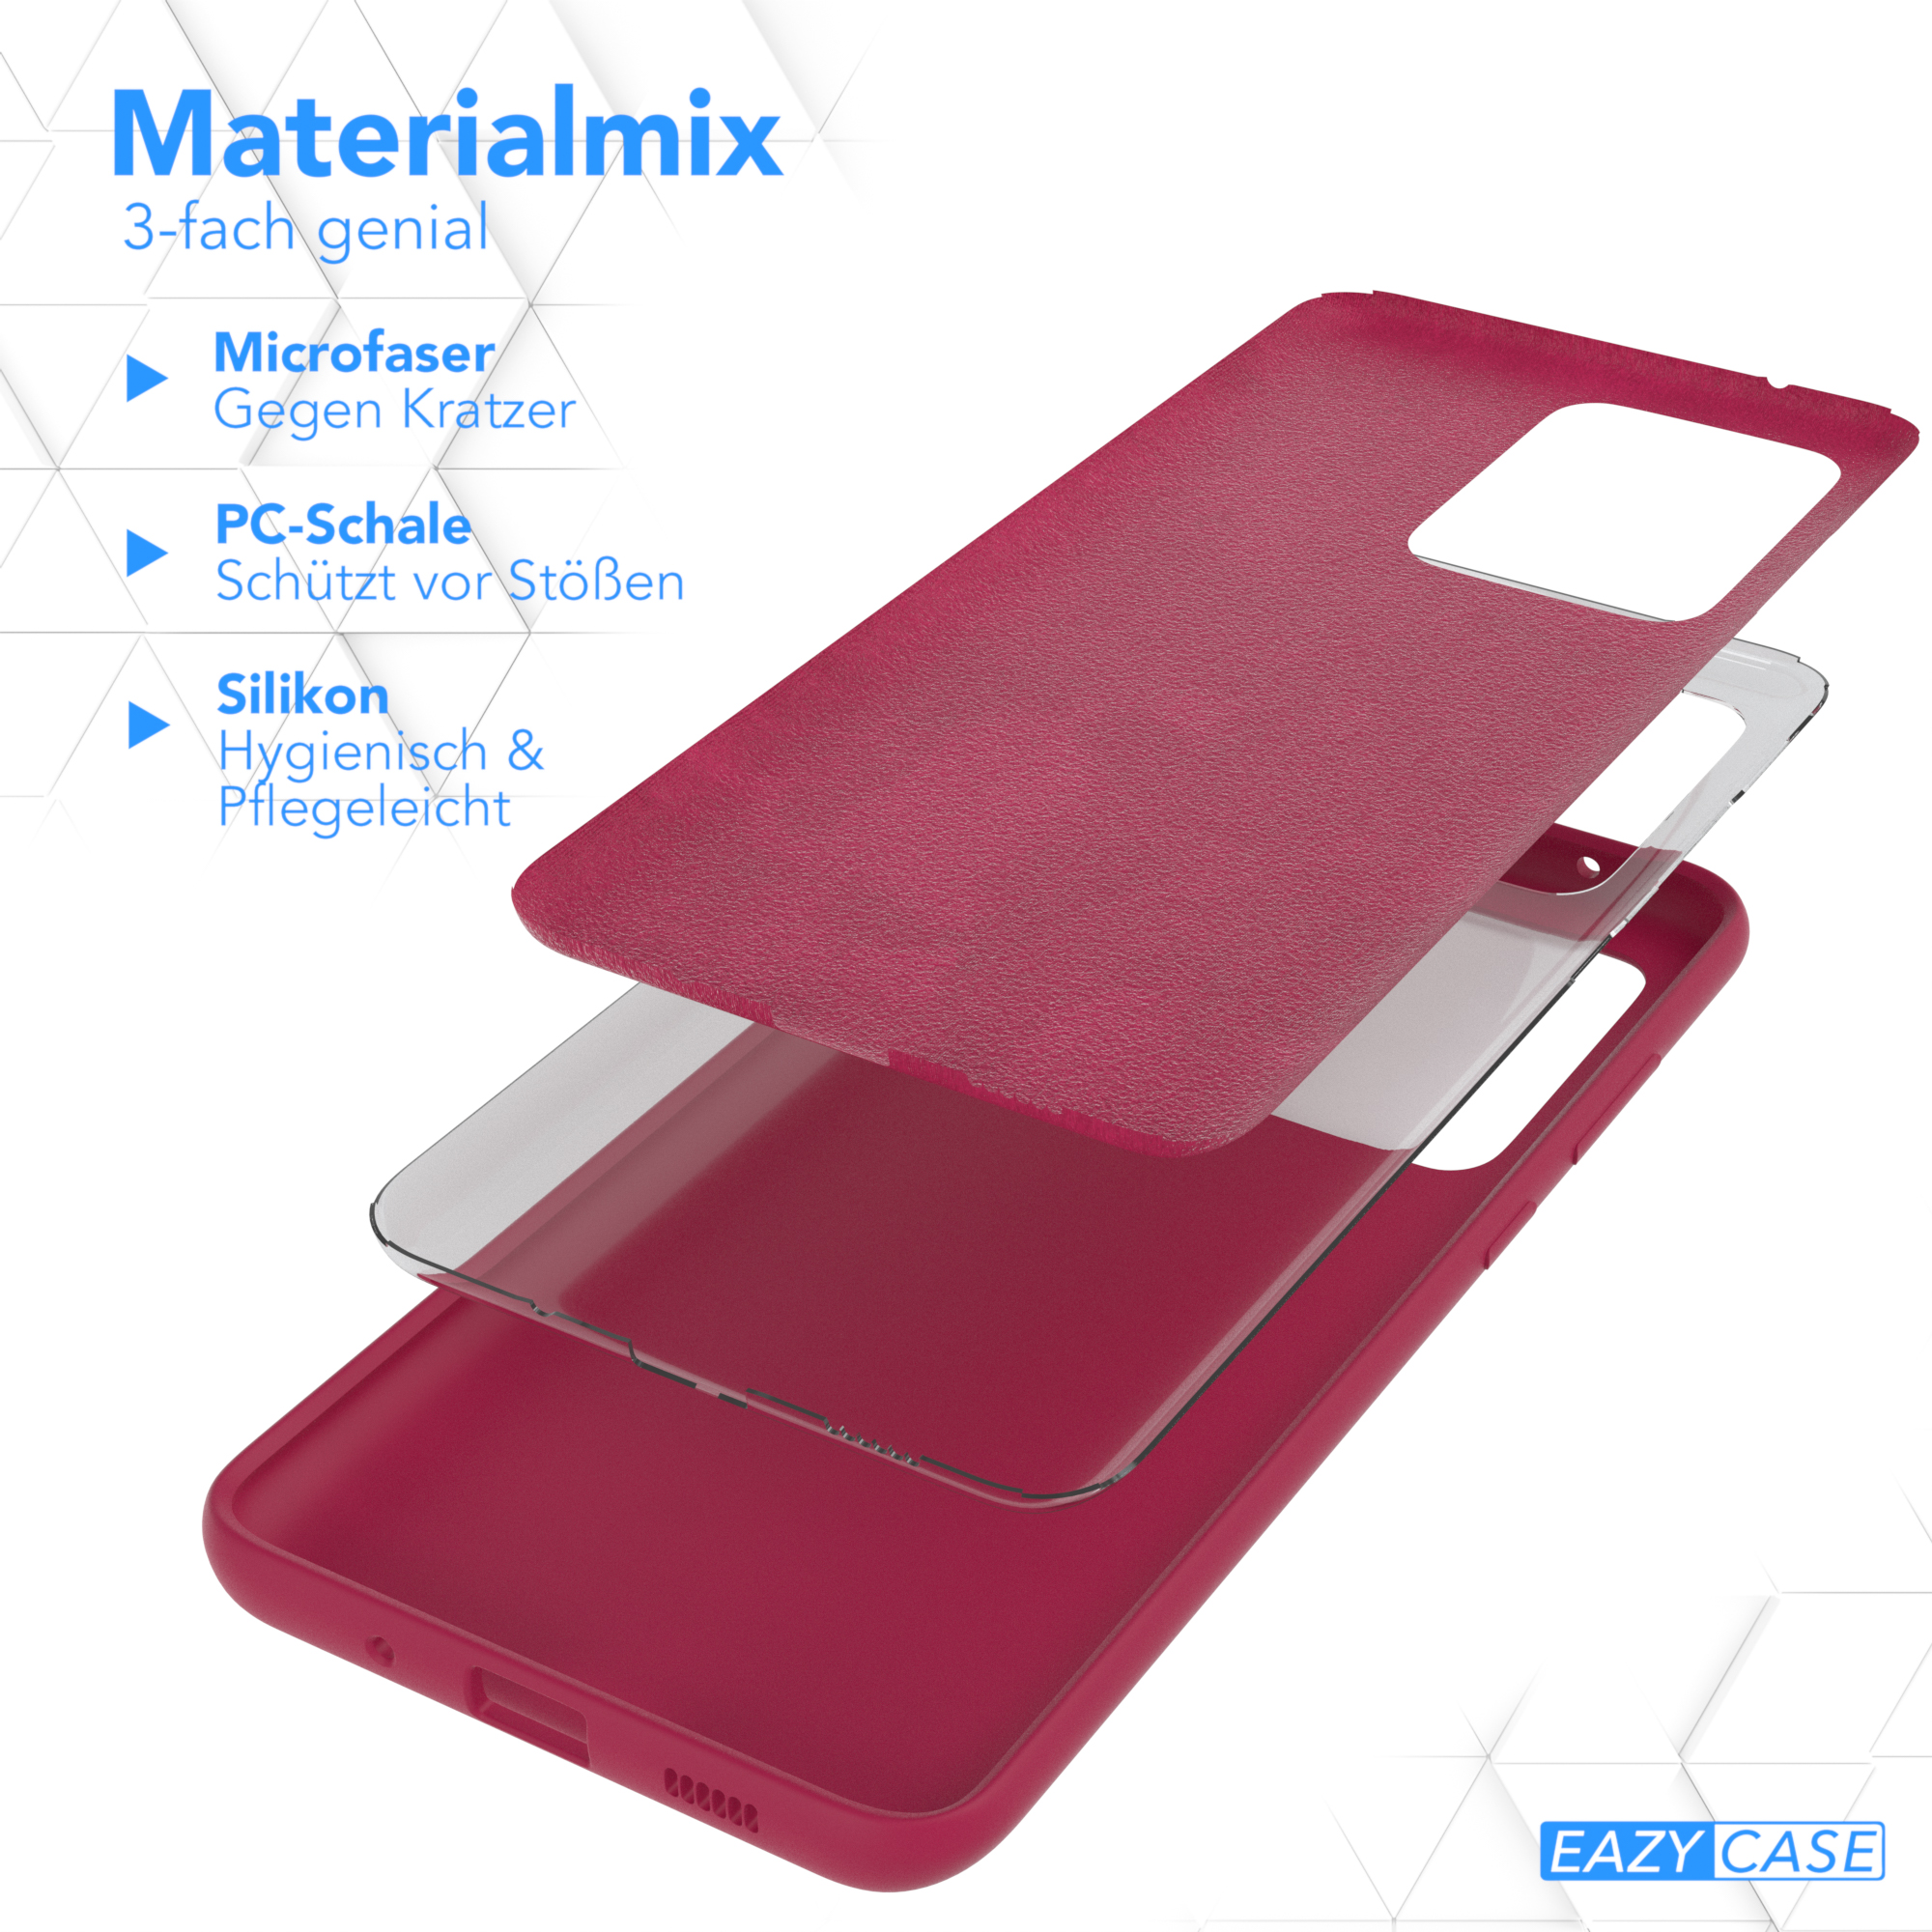 EAZY CASE Premium Silikon Handycase, Ultra Galaxy Backcover, Samsung, / S20 S20 Beere Ultra 5G, Rot 